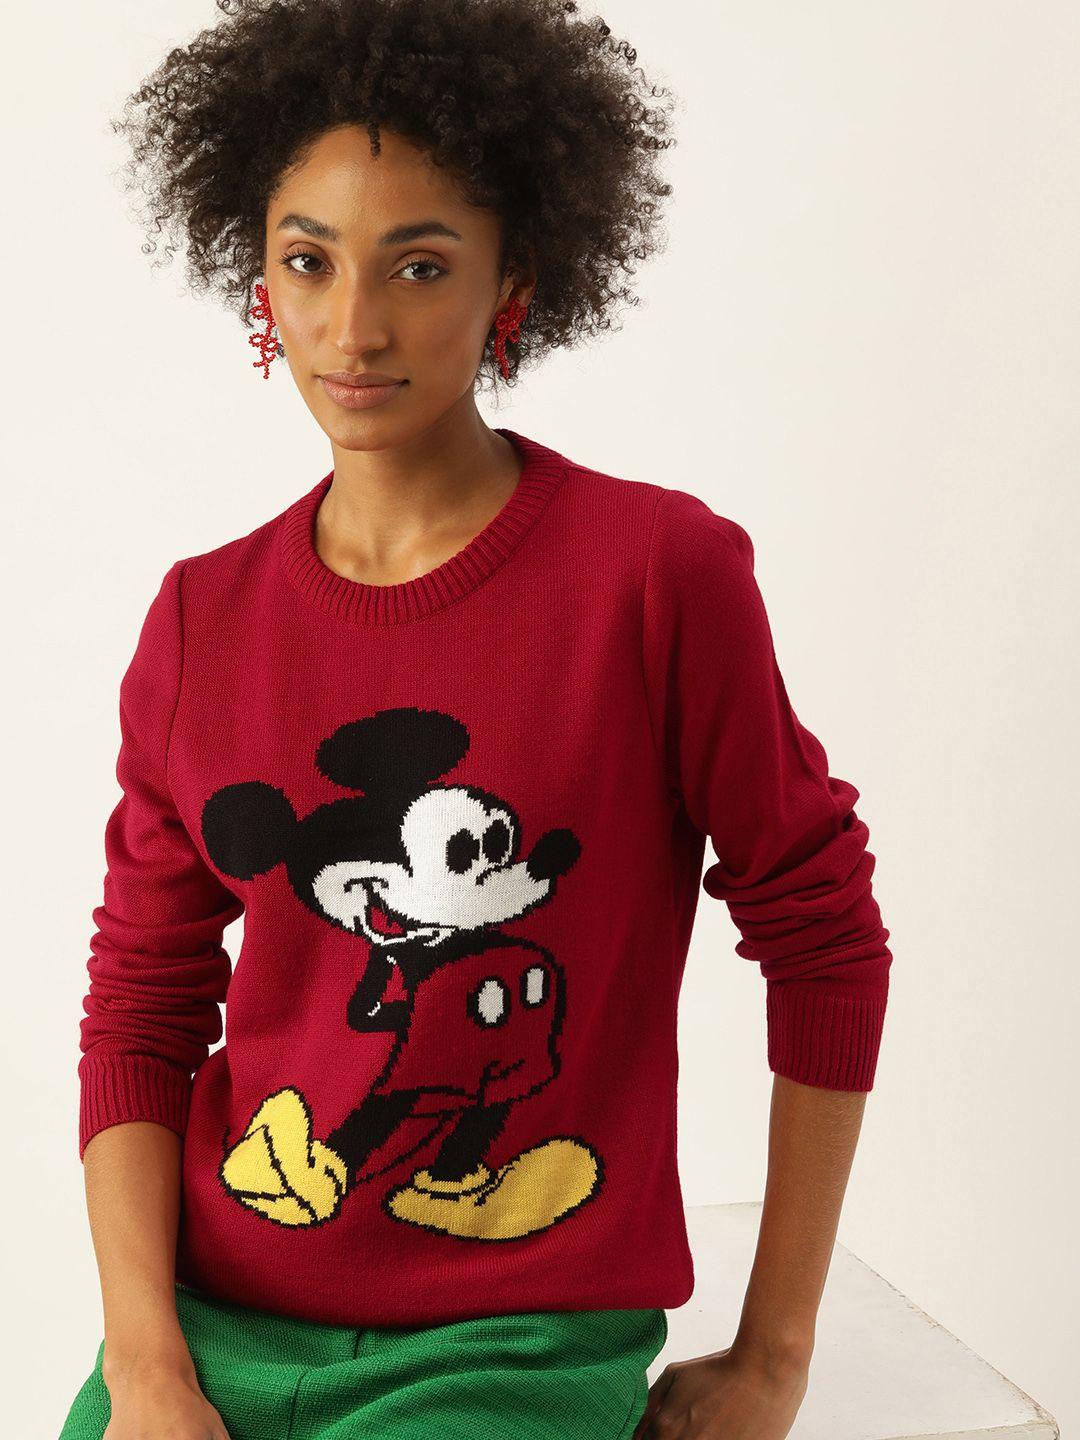 kook-n-keech-disney-women-red-&-white-mickey-mouse-printed-pullover